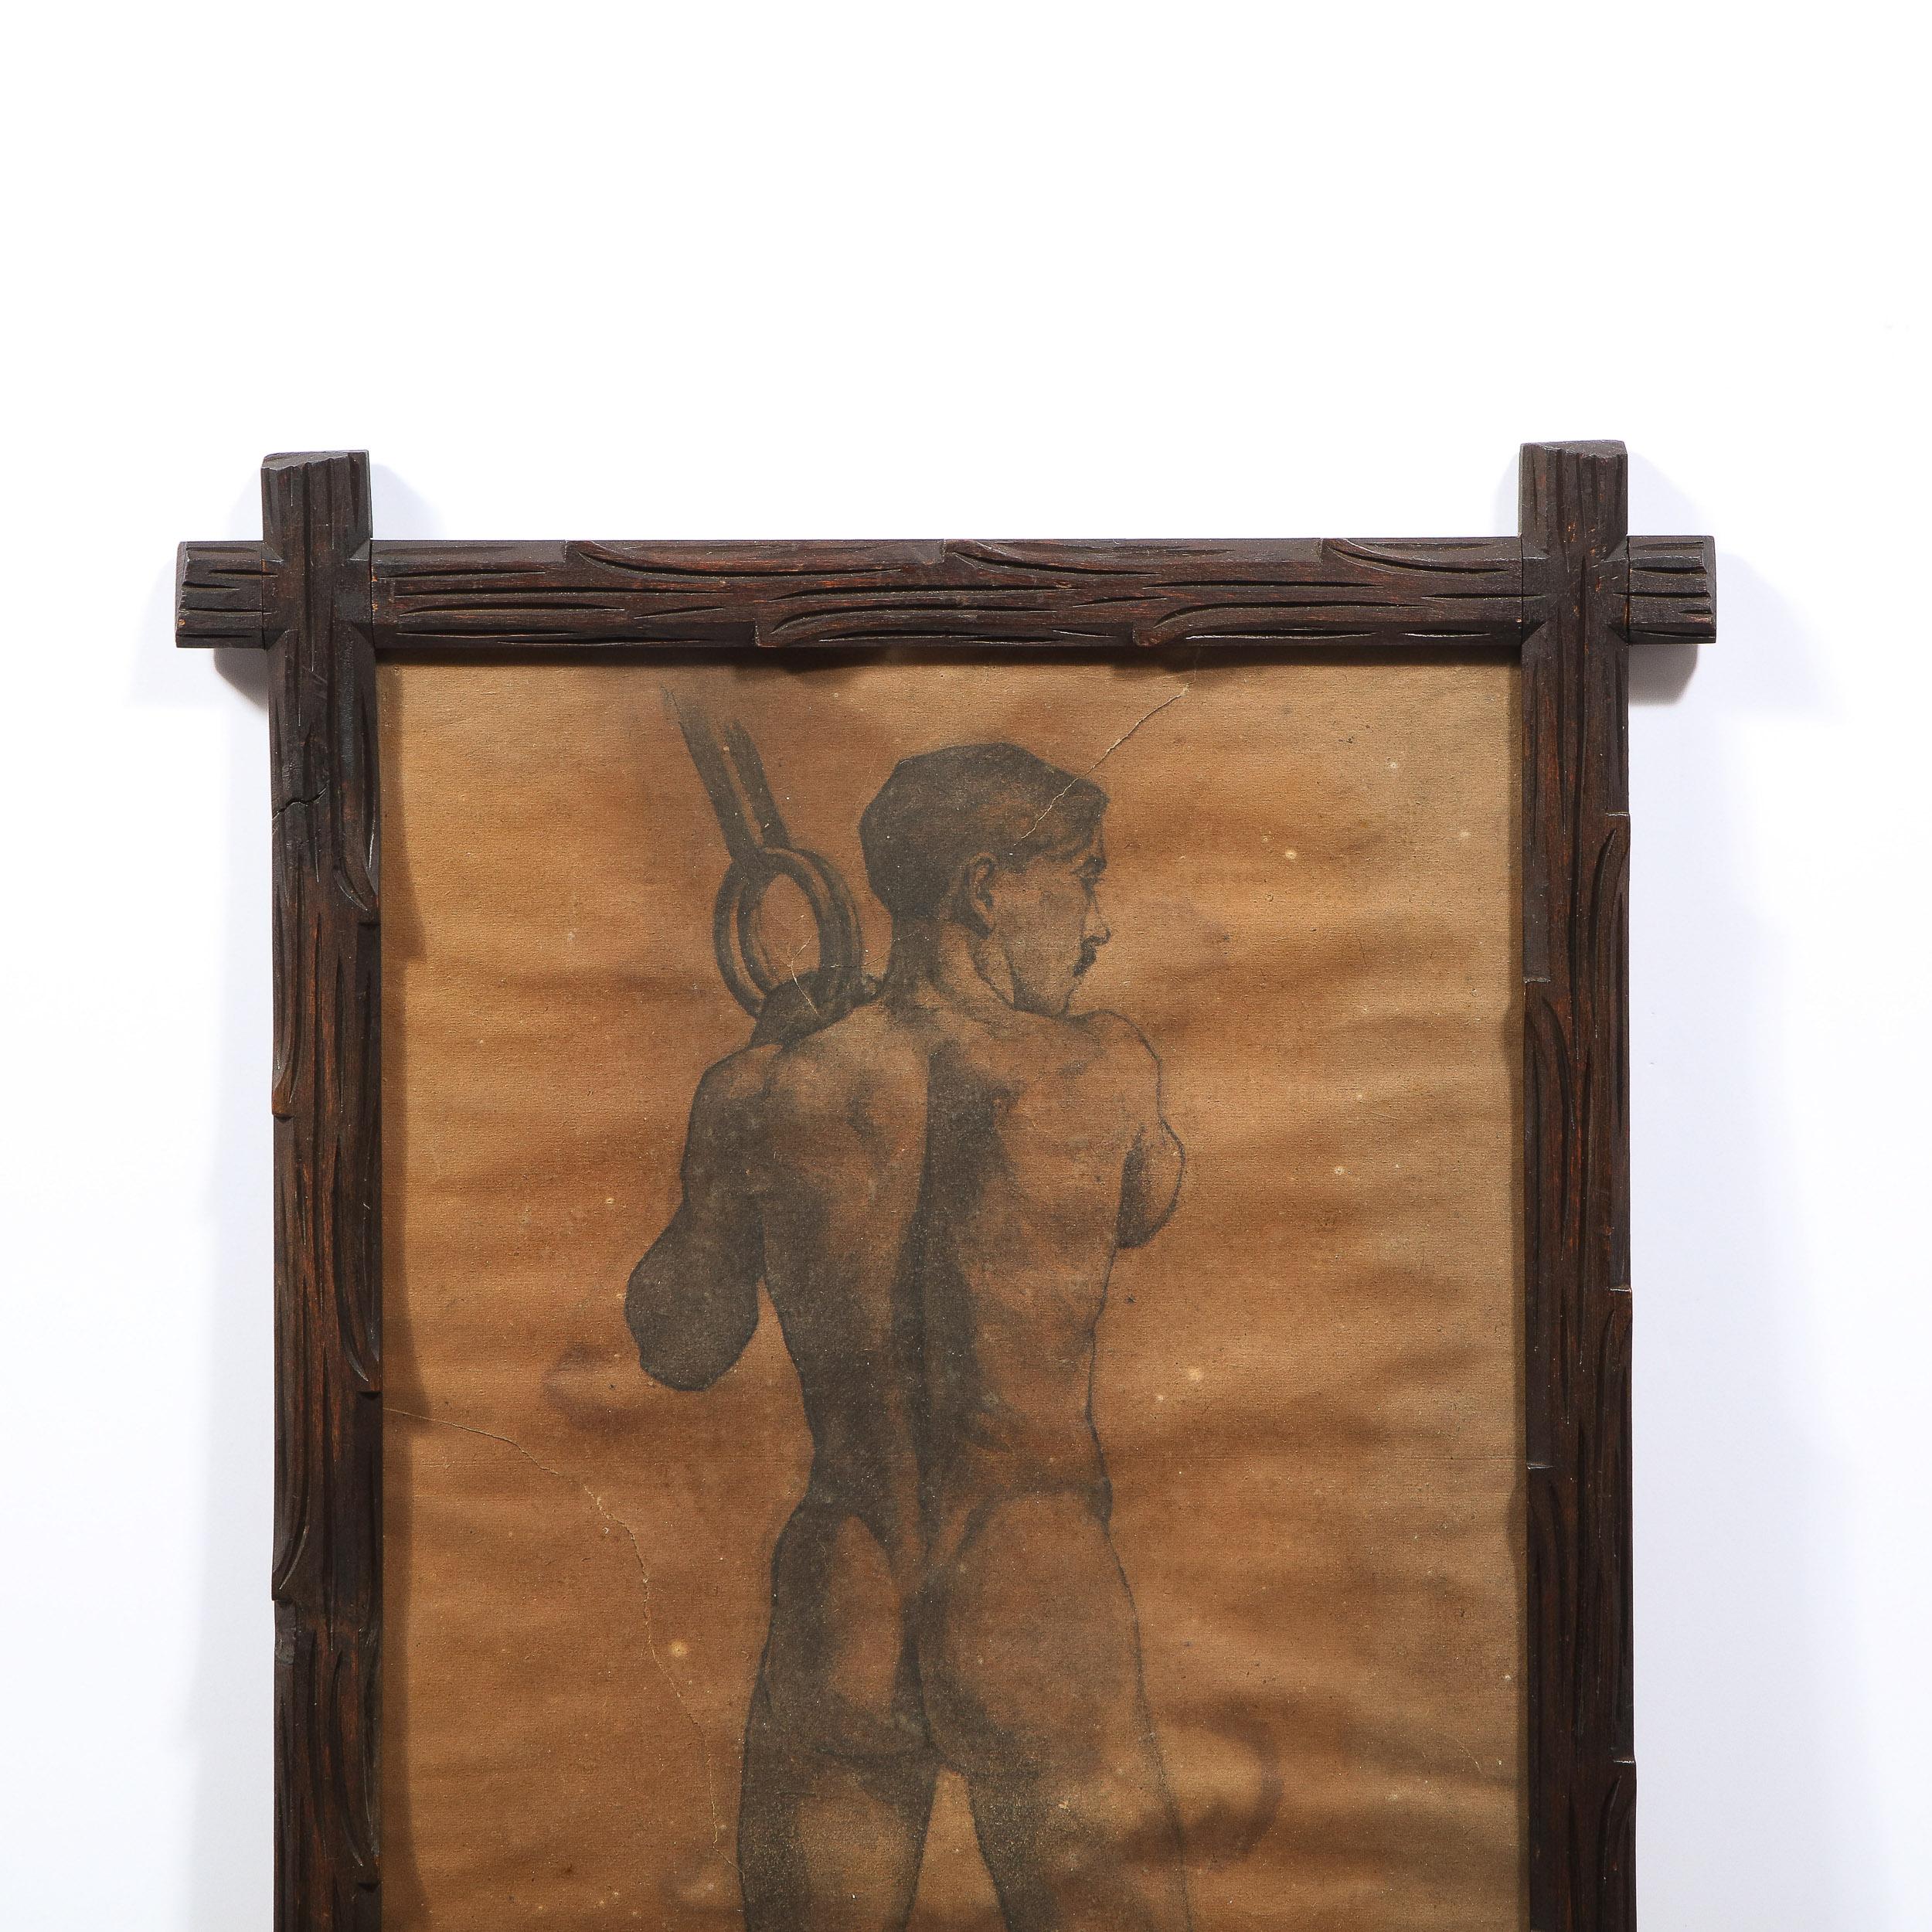 This refined art nouveau diptych was realized in Hungary in 1908/1909 by the famed artist of the Austro-Hungarian artist Henrik Kóbor. It features two rectangular panels each offering male nude figures rendered in charcoal and graphite on parchment.